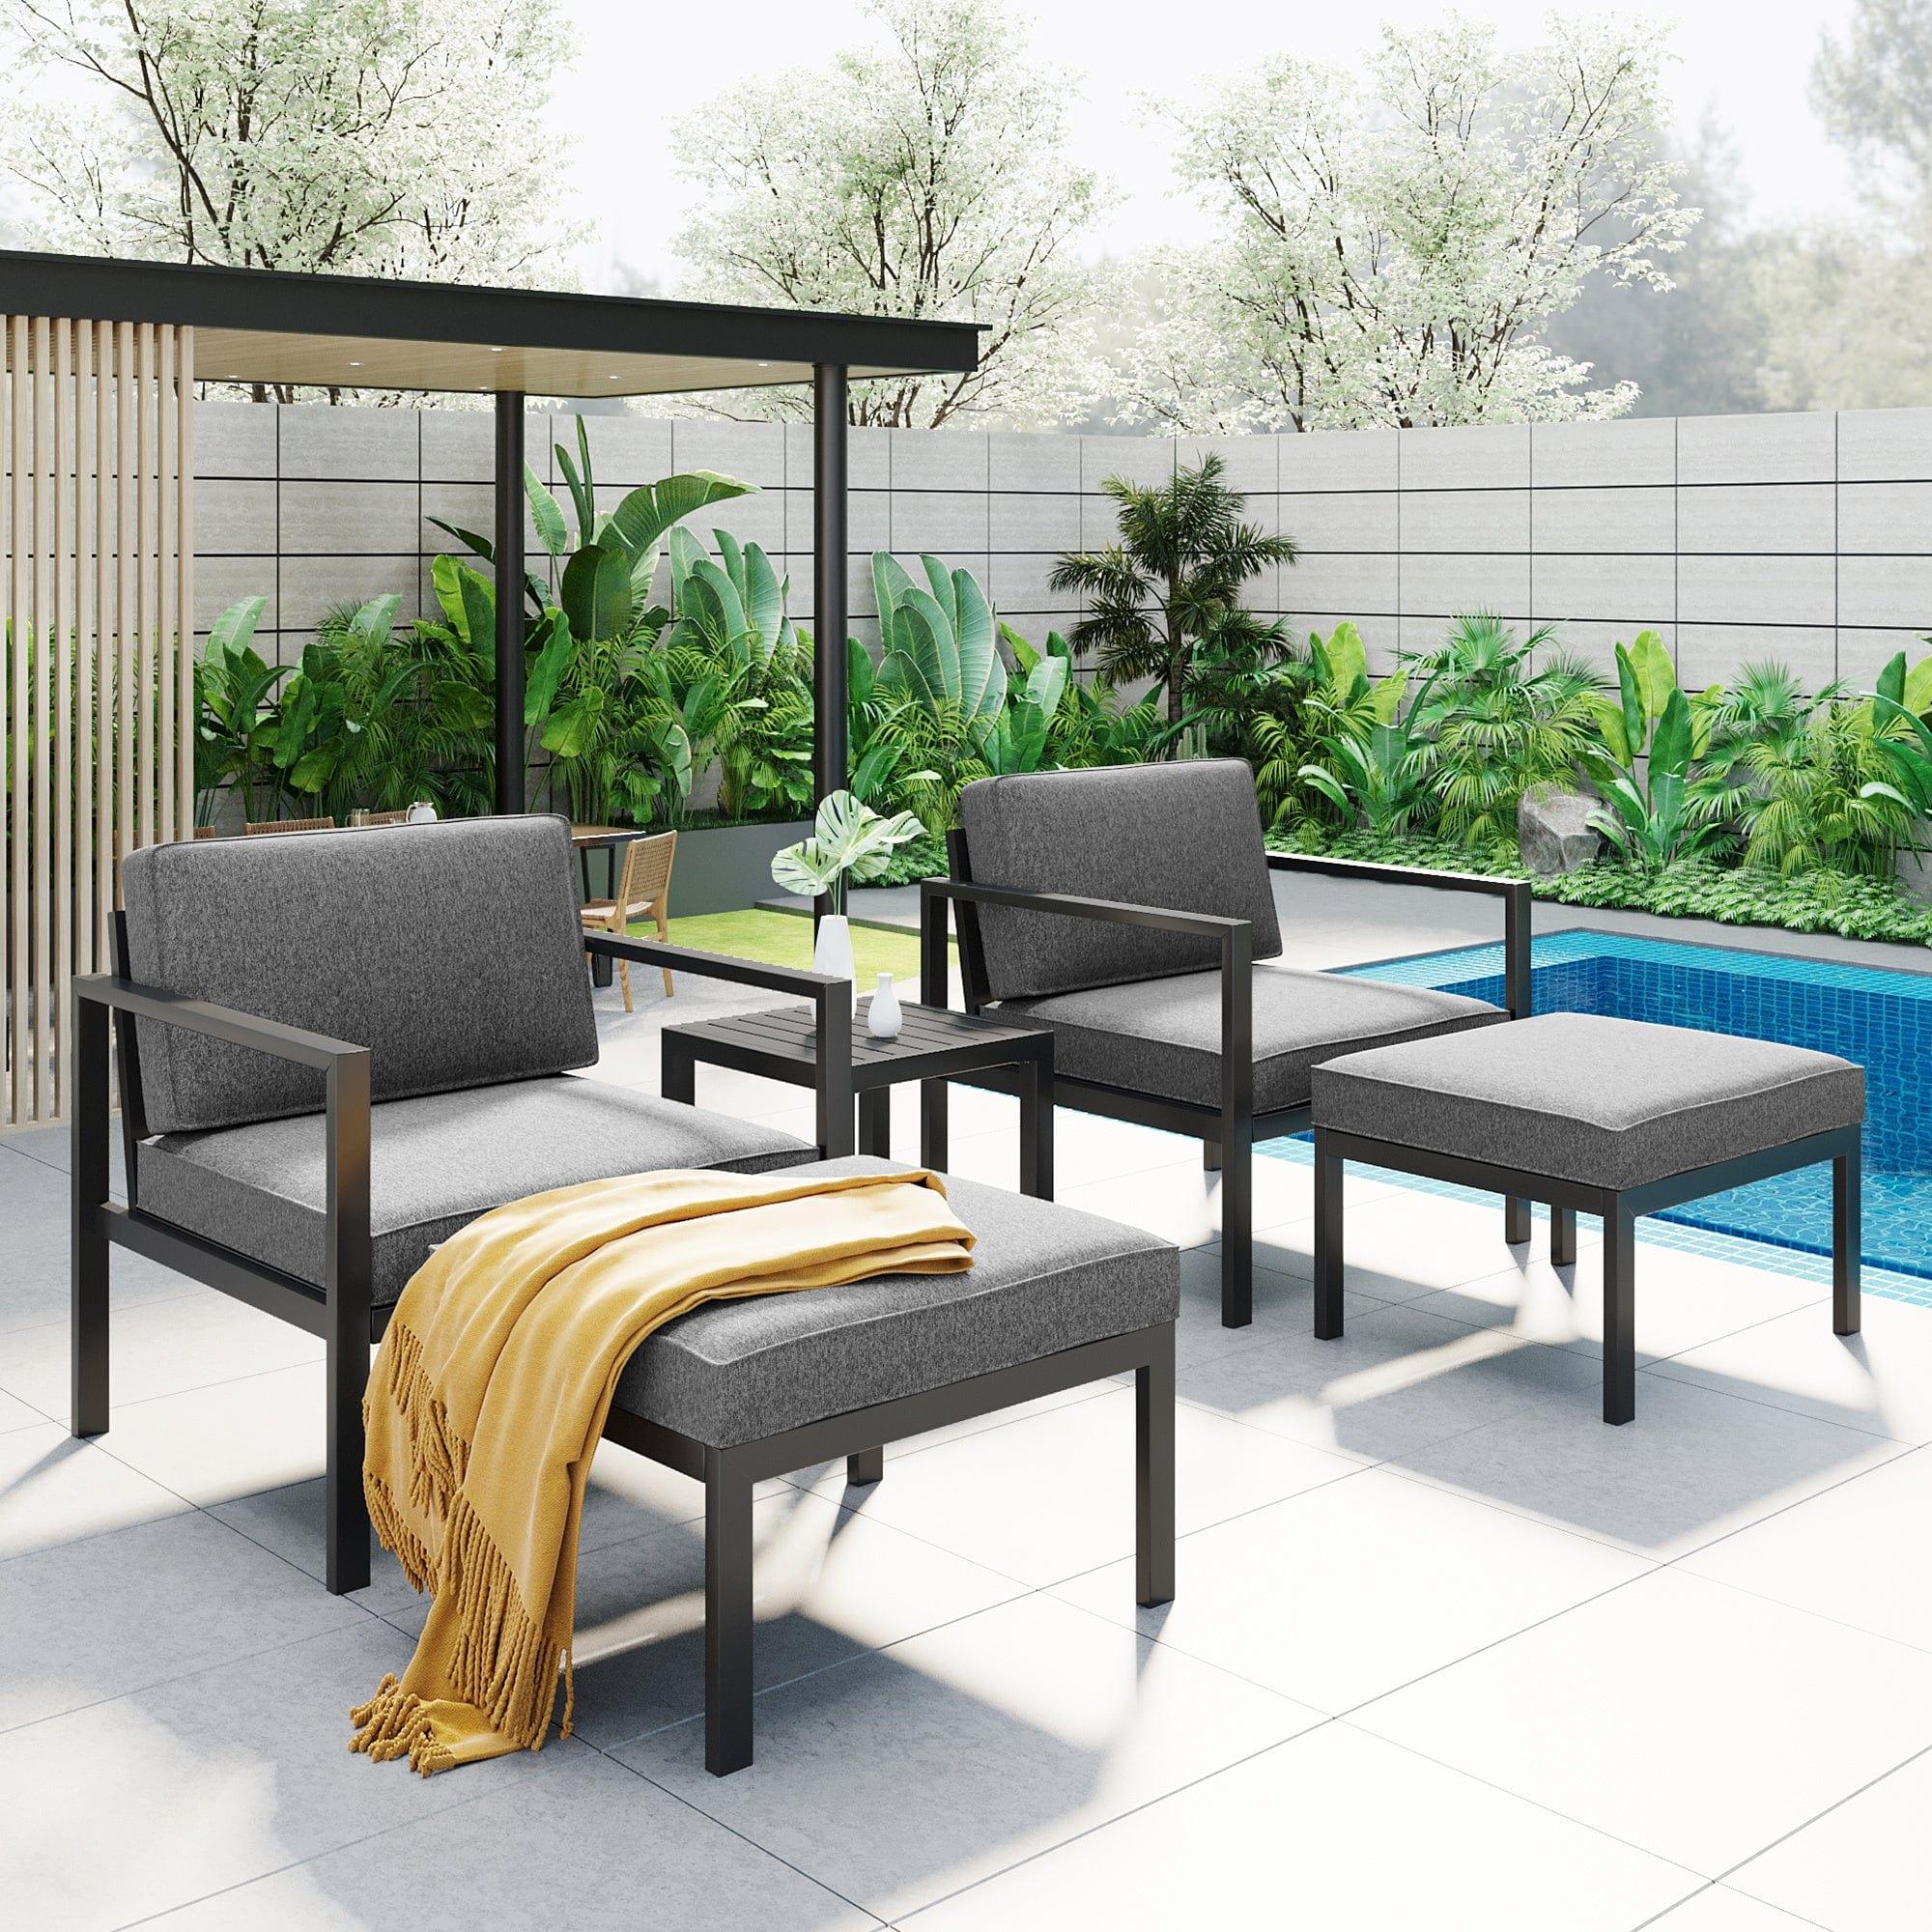 Shop TOPMAX Outdoor Patio 5-piece Aluminum Alloy Conversation Set Sofa Set with Coffee Table and Stools for Poolside, Garden,Black Frame+Gray Cushion Mademoiselle Home Decor